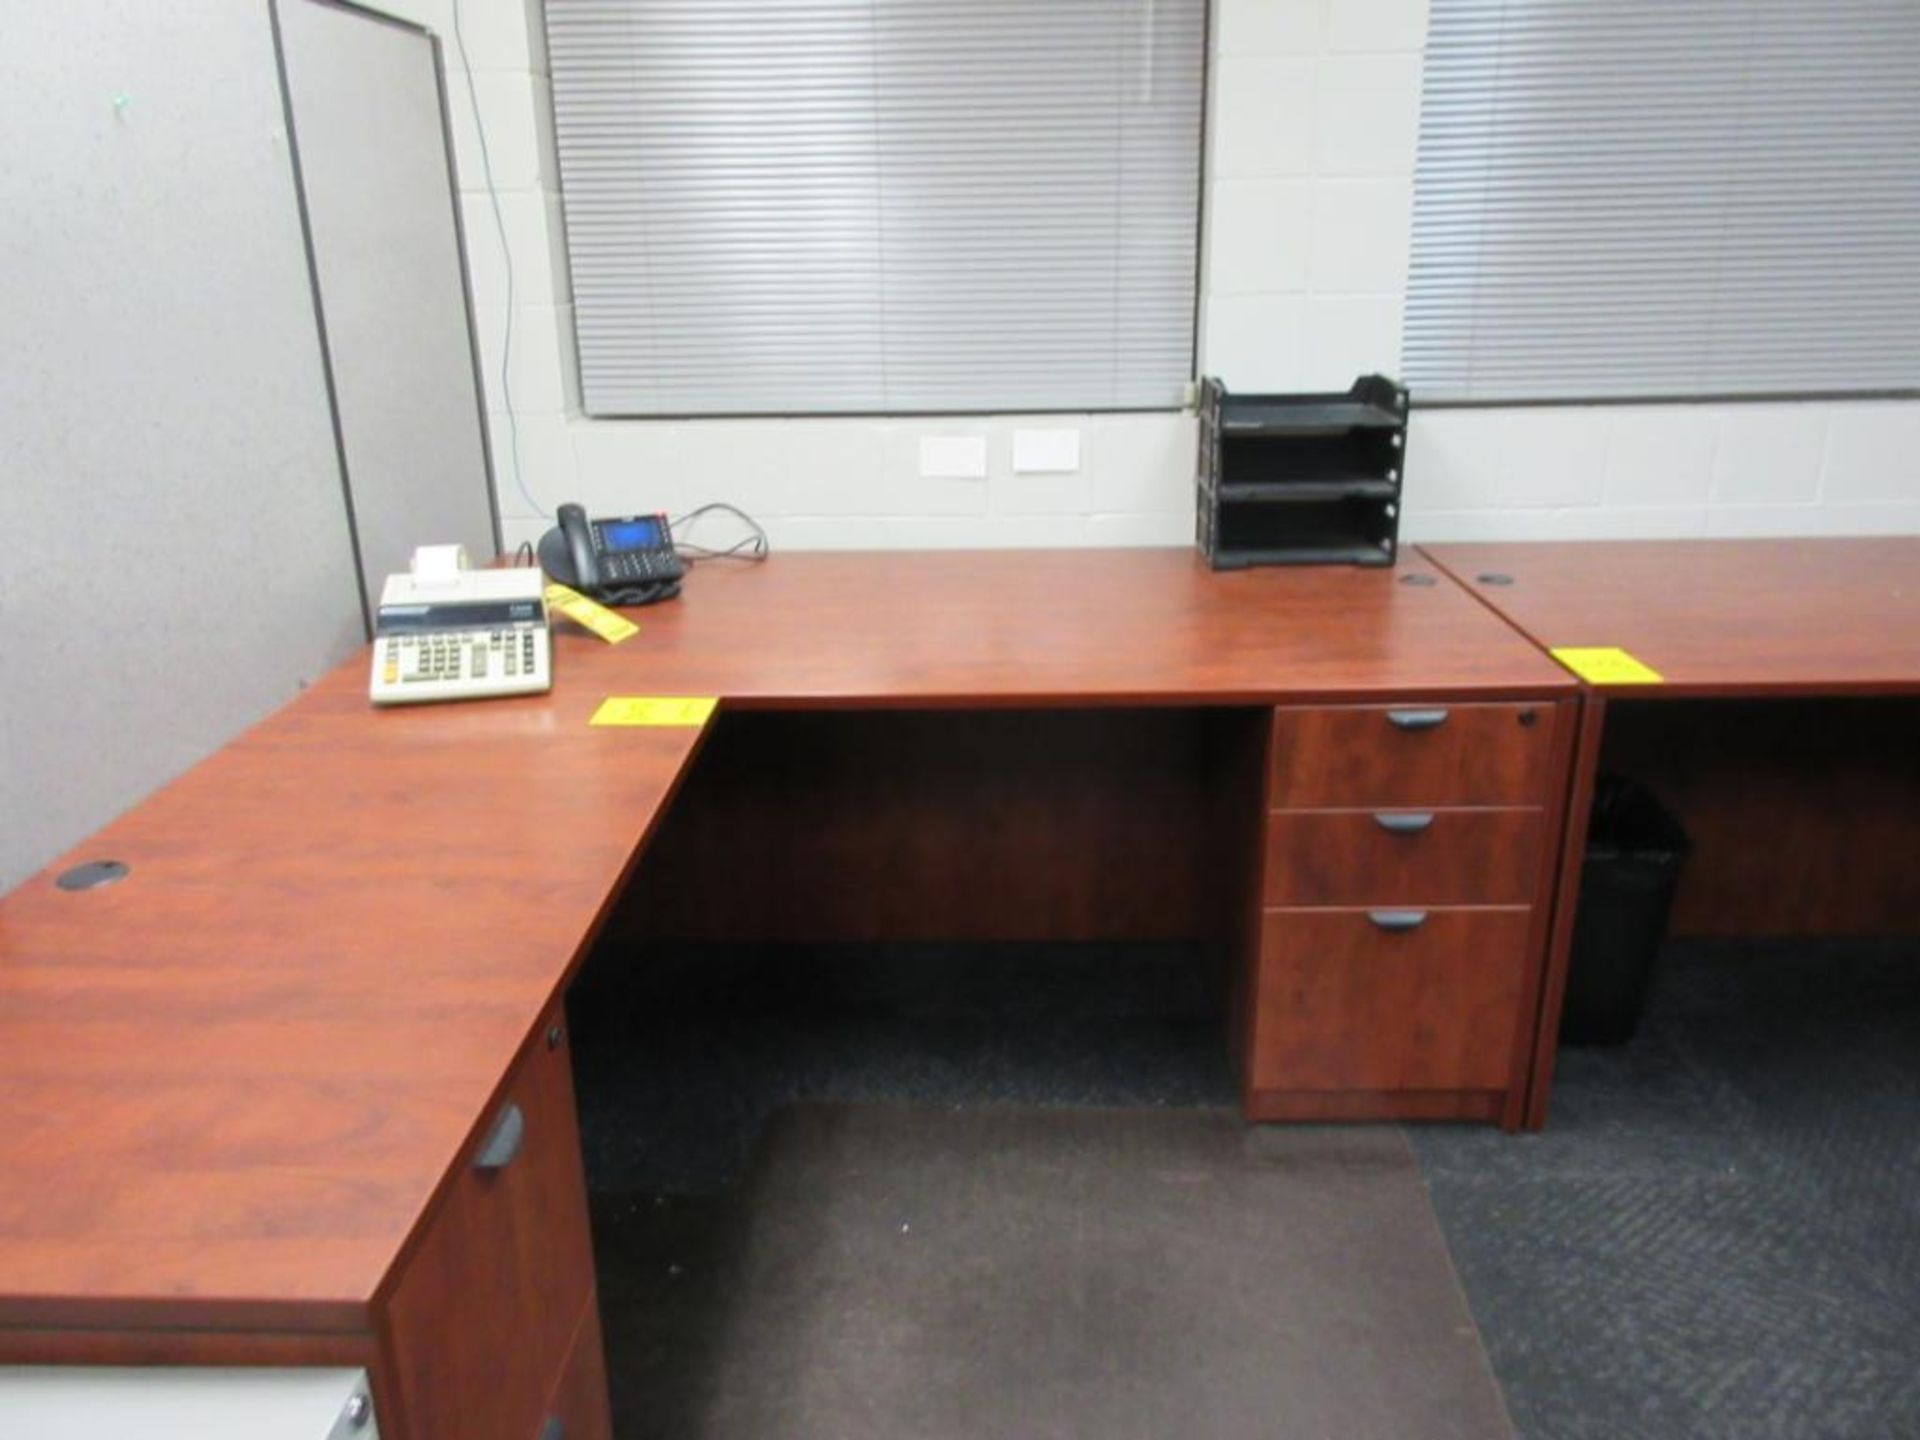 OFFICE AND CONTENTS: DESK CHAIRS FILE CABINETS SHELVING UNIT 2-DOOR CABINET TABLES CUBICLE PANELS - Image 8 of 9